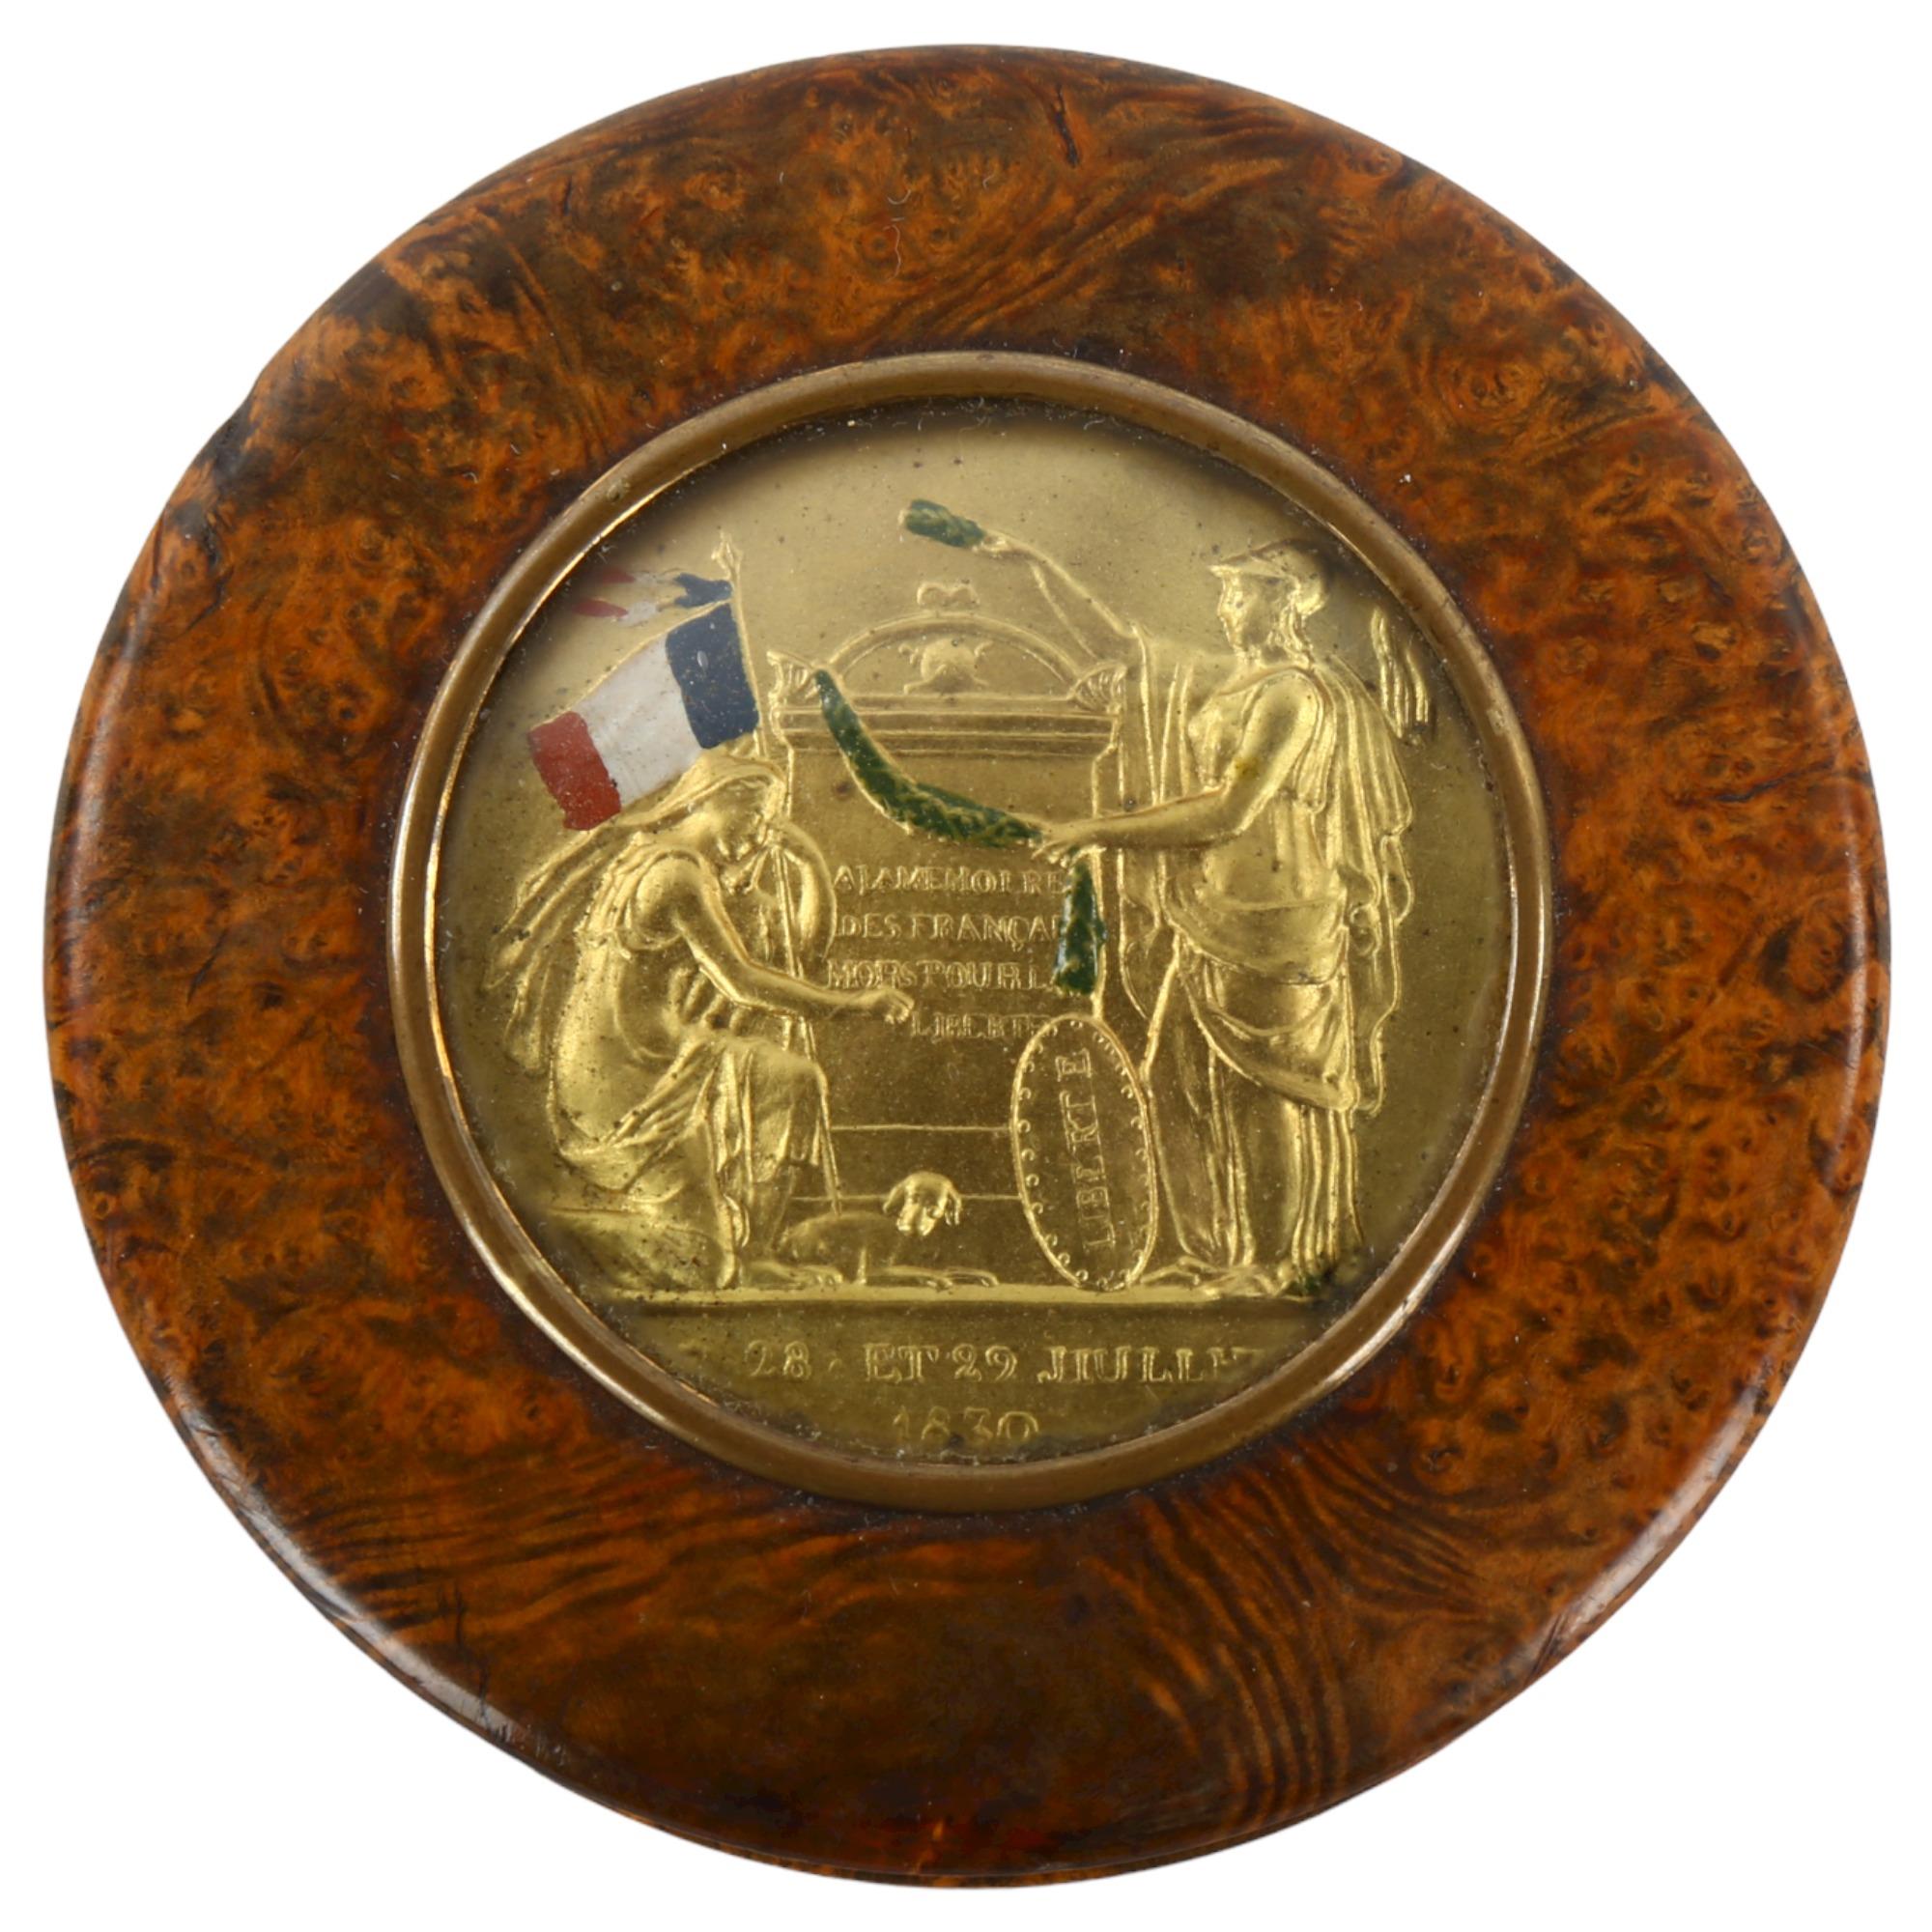 A 19th century French circular burr-walnut box, the lid having an inset medallion commemorating